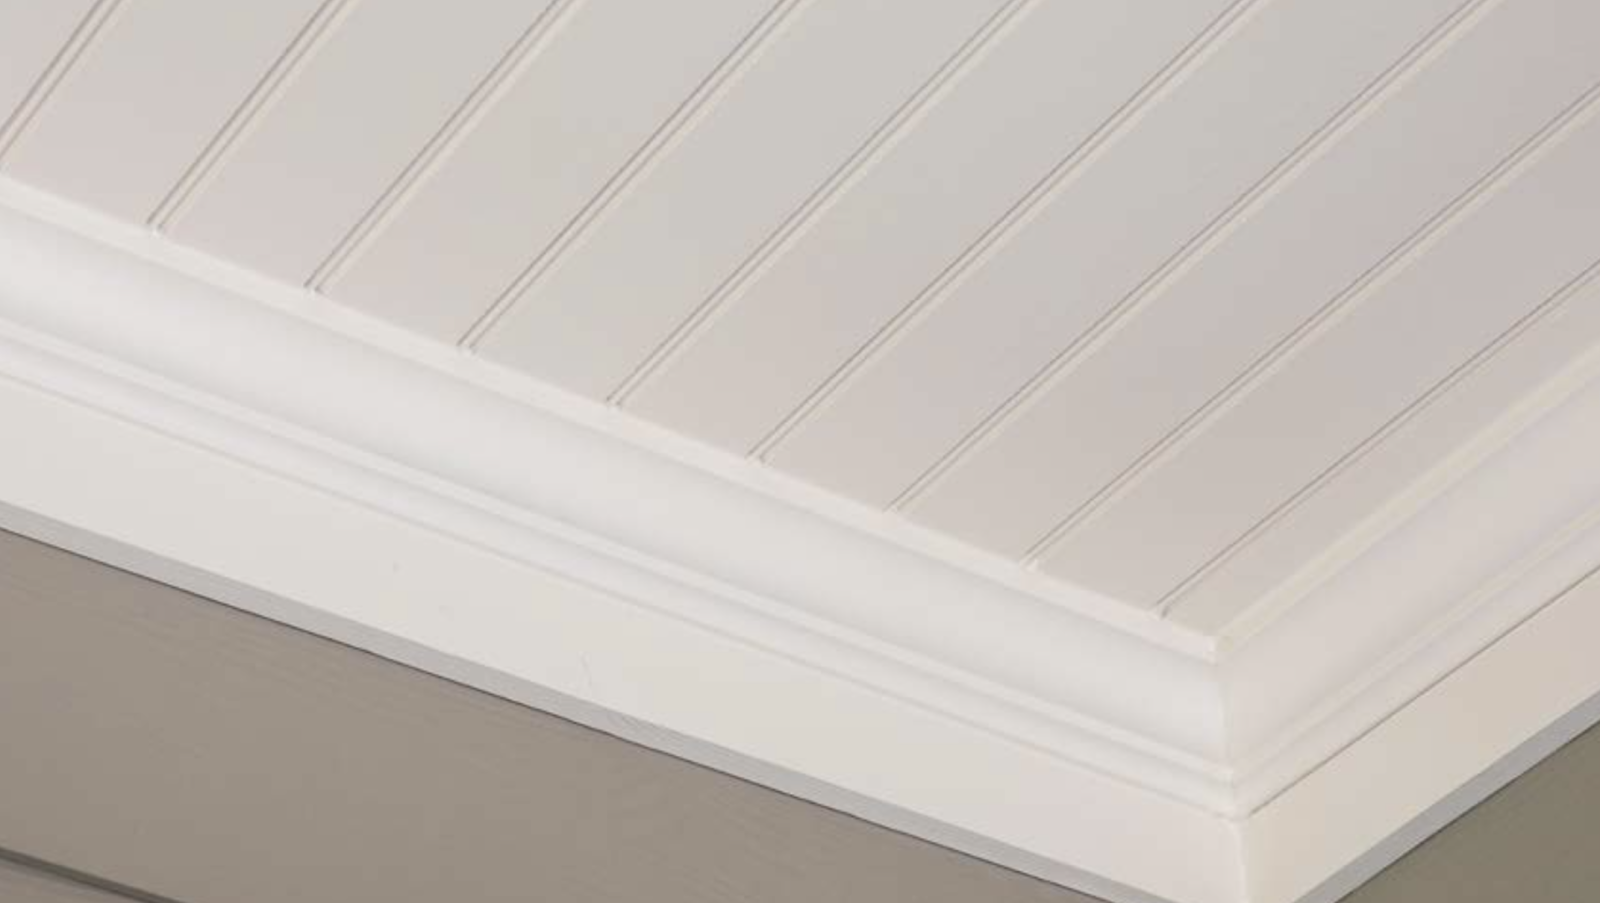 4 Porch Ceiling Design Ideas Dress Up Your Porch Ceiling In Style